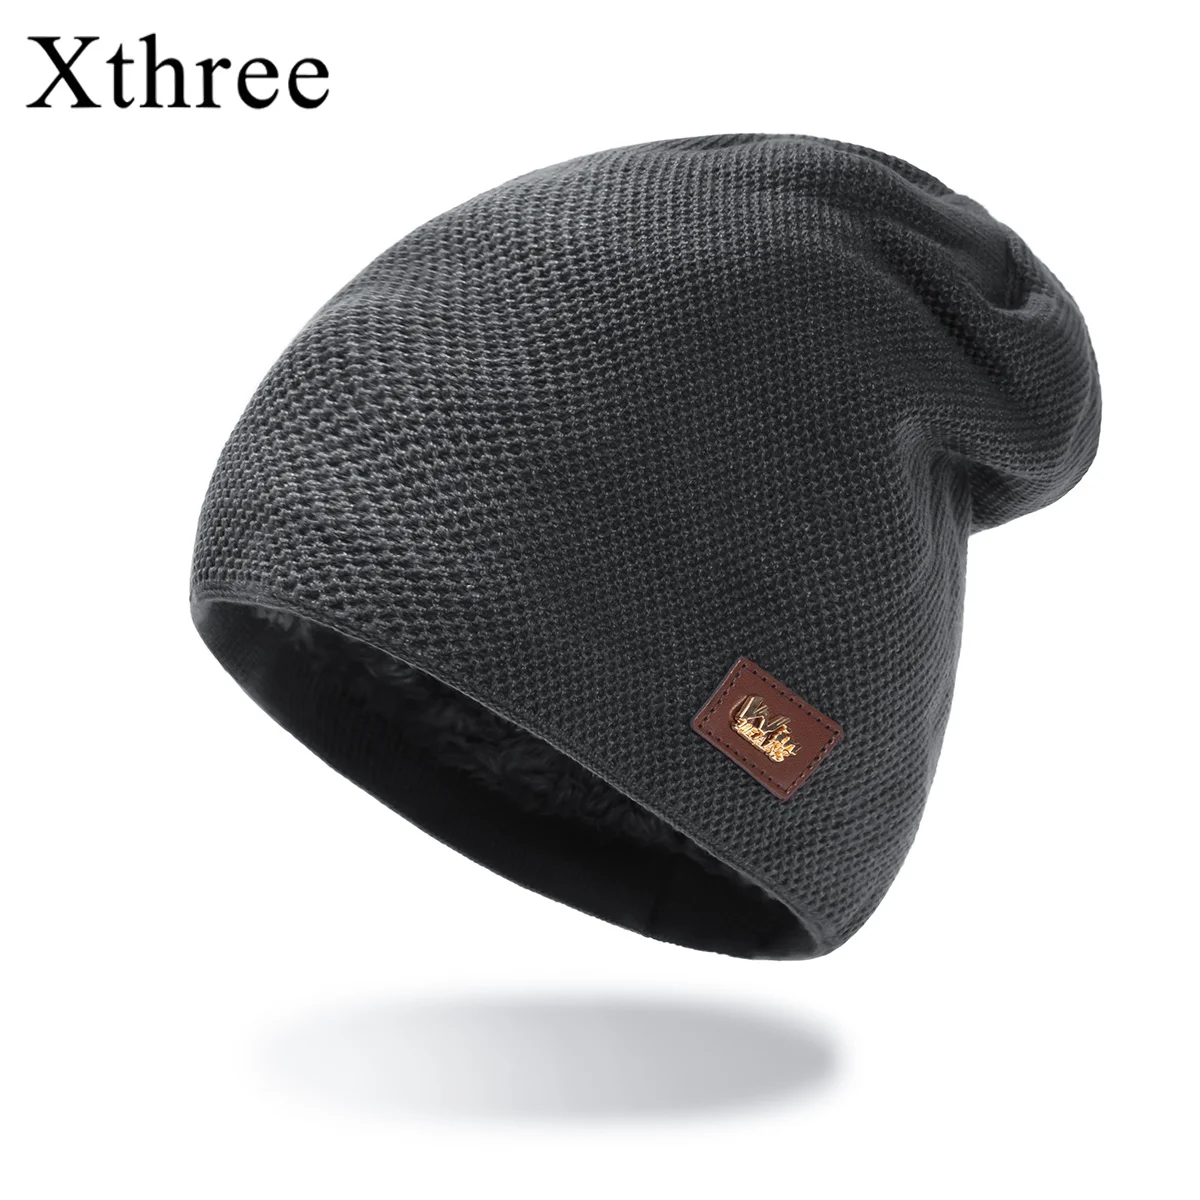 

Xthree Winter Beanies Hat for Men's Hat Knitted Skullies With Lining Wool Male Gorras Bonnet Winter Hats For Men Beanies Hats